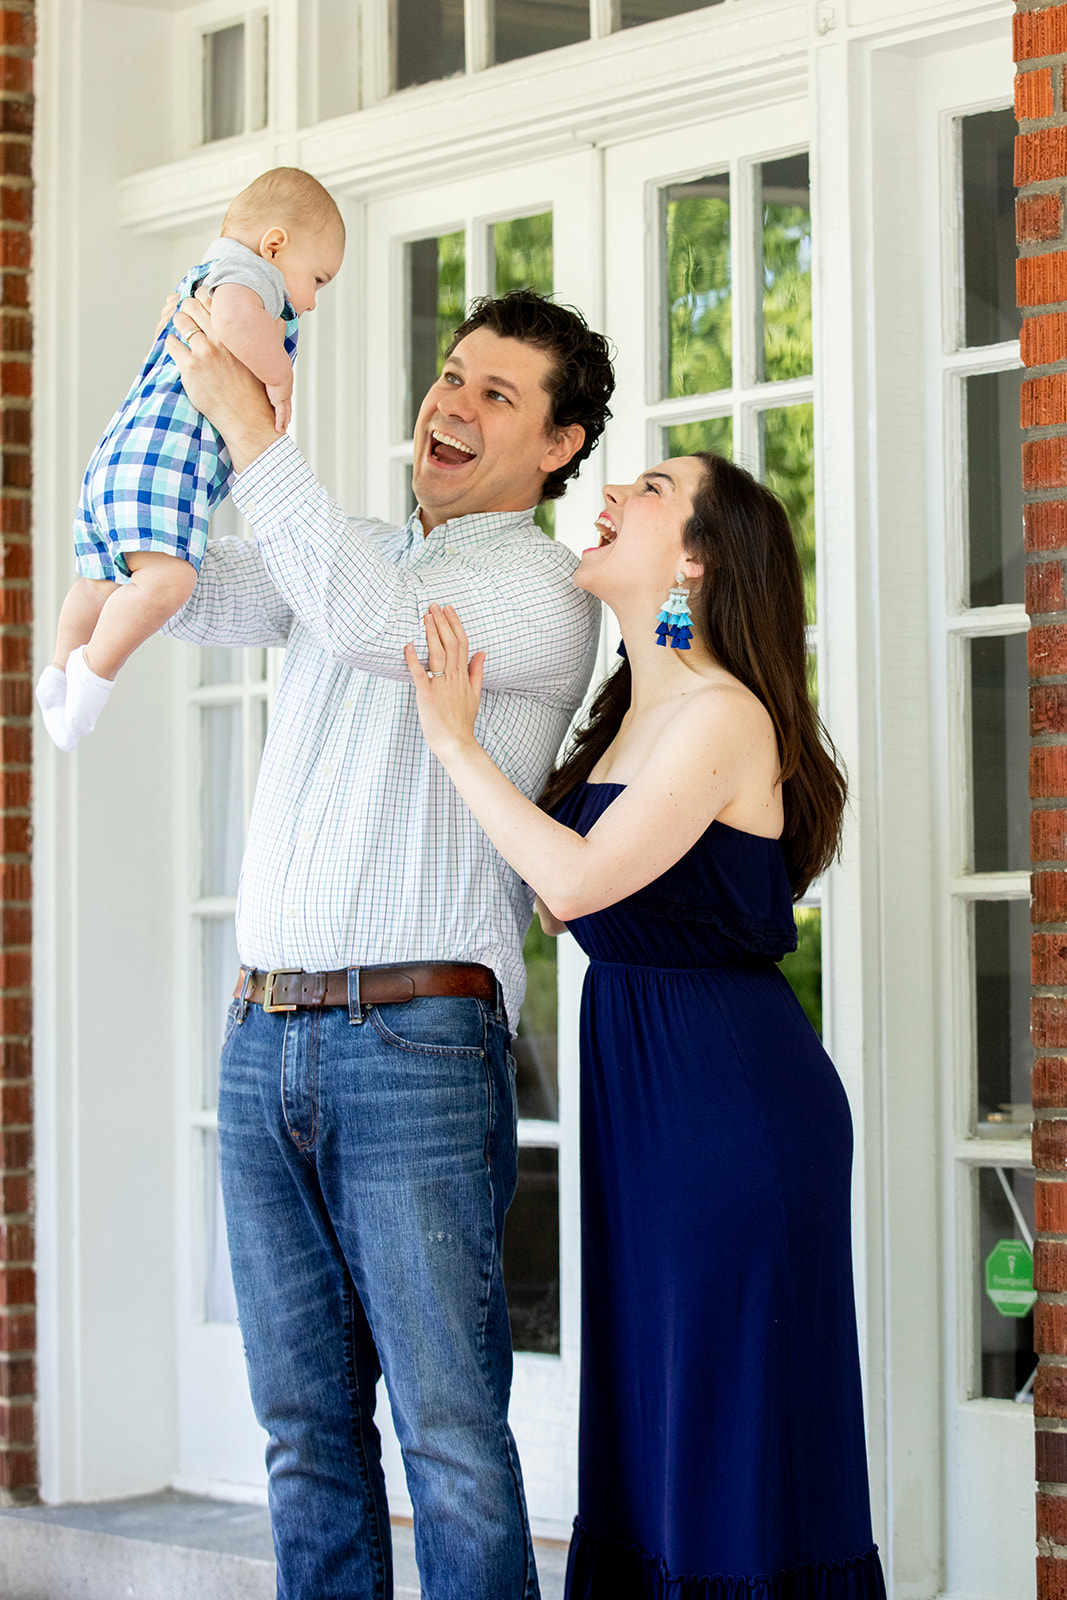 Mothers Day Front Porch Session Highlights - Image Property of www.j-dphoto.com